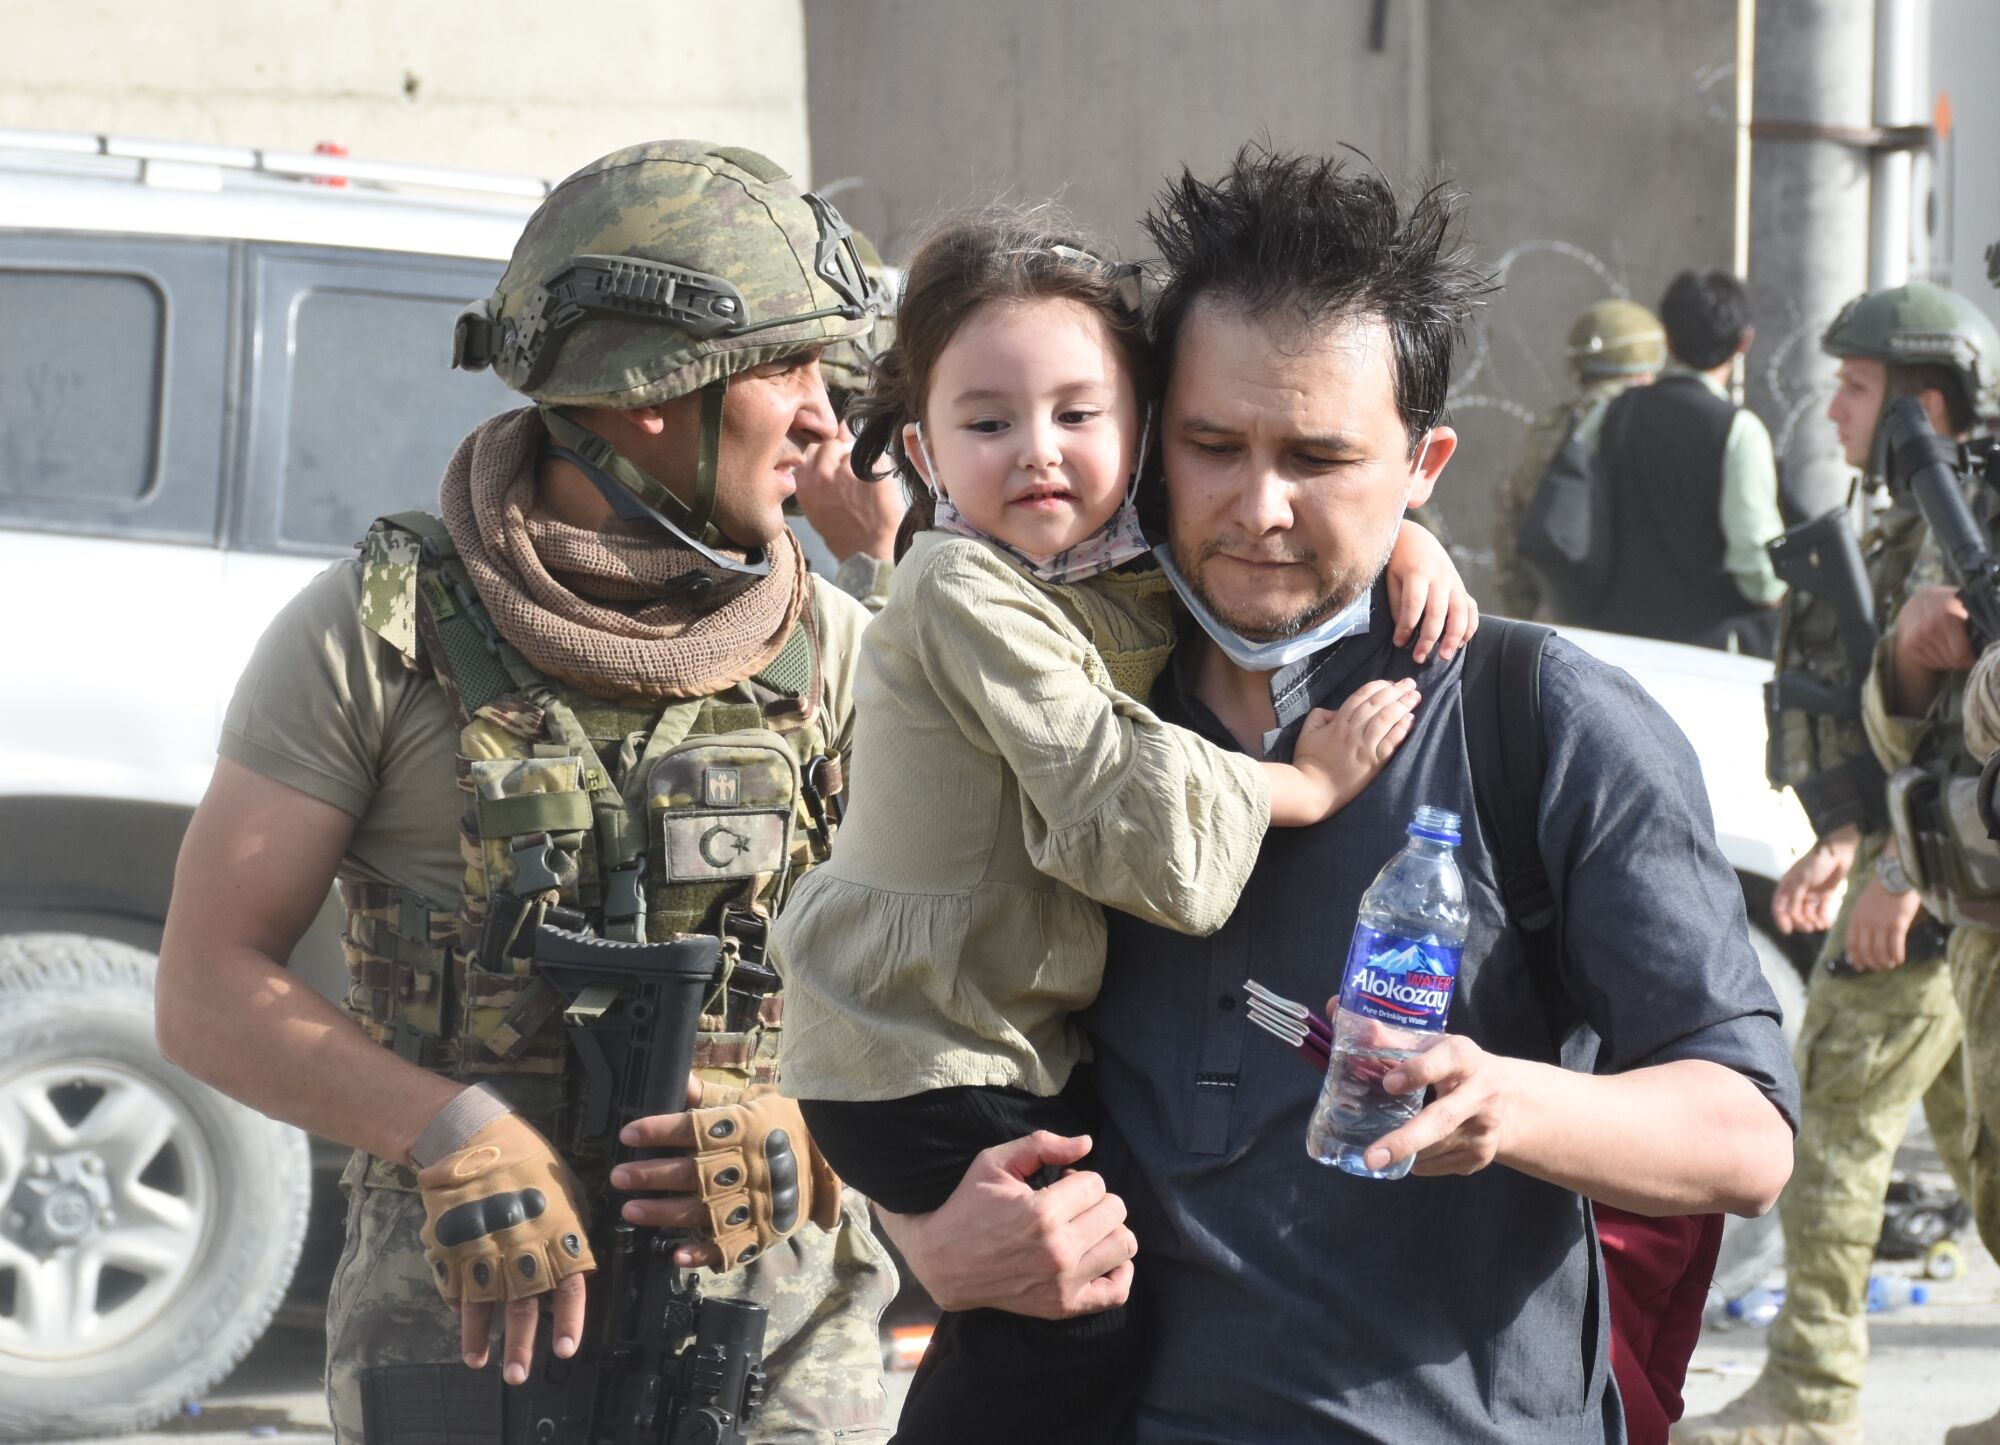 Accompanied by soldiers, a man carries a small child